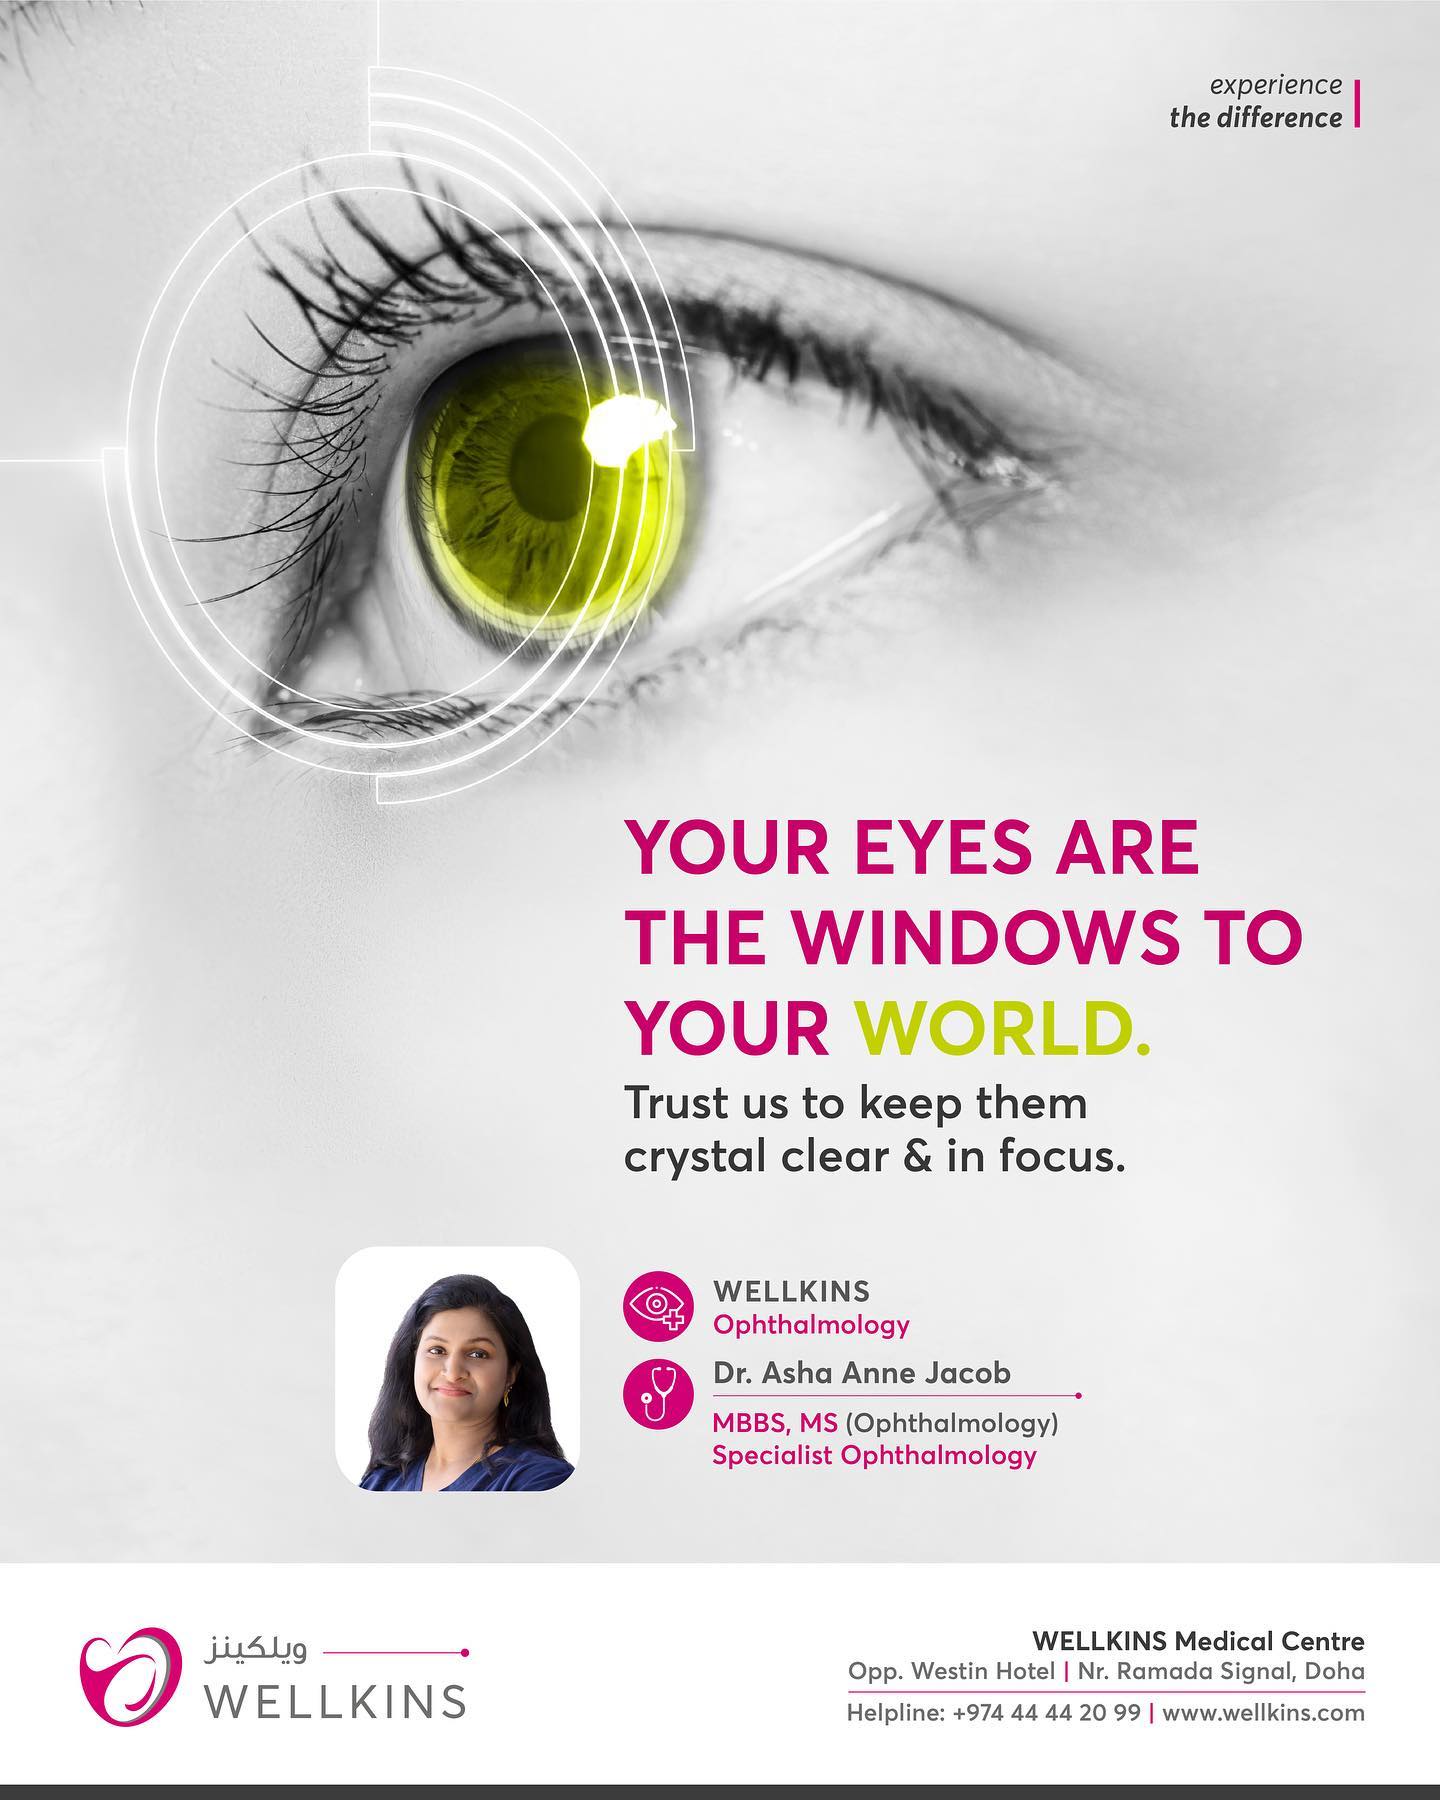 Looking for an ophthalmologist you can trust to keep your eyes healthy and in focus? Look no further than Dr. Asha Anne Jacob at Wellkins Medical Centre! Your eyes are the windows to the world, and Dr. Asha Anne Jacob is dedicated to providing the highest quality of care to help you see clearly and maintain healthy vision. 

Whether you're experiencing vision problems or just need a routine eye exam, Dr. Asha Anne Jacob and the team at Wellkins Medical Centre are here to help. Book your appointment today and let us help you see the world clearly! 
.
.
.
.
_______________________________
To learn more about #WELLKINSQATAR and our services, kindly visit our website www.wellkins.com
Helpline: 4444 2099
_______________________________
#Wellkinsqatar #wellkins #medicalcentre #HealthyEyes #OphthalmologyExpert #WellkinsMedicalCentre #ClearVision